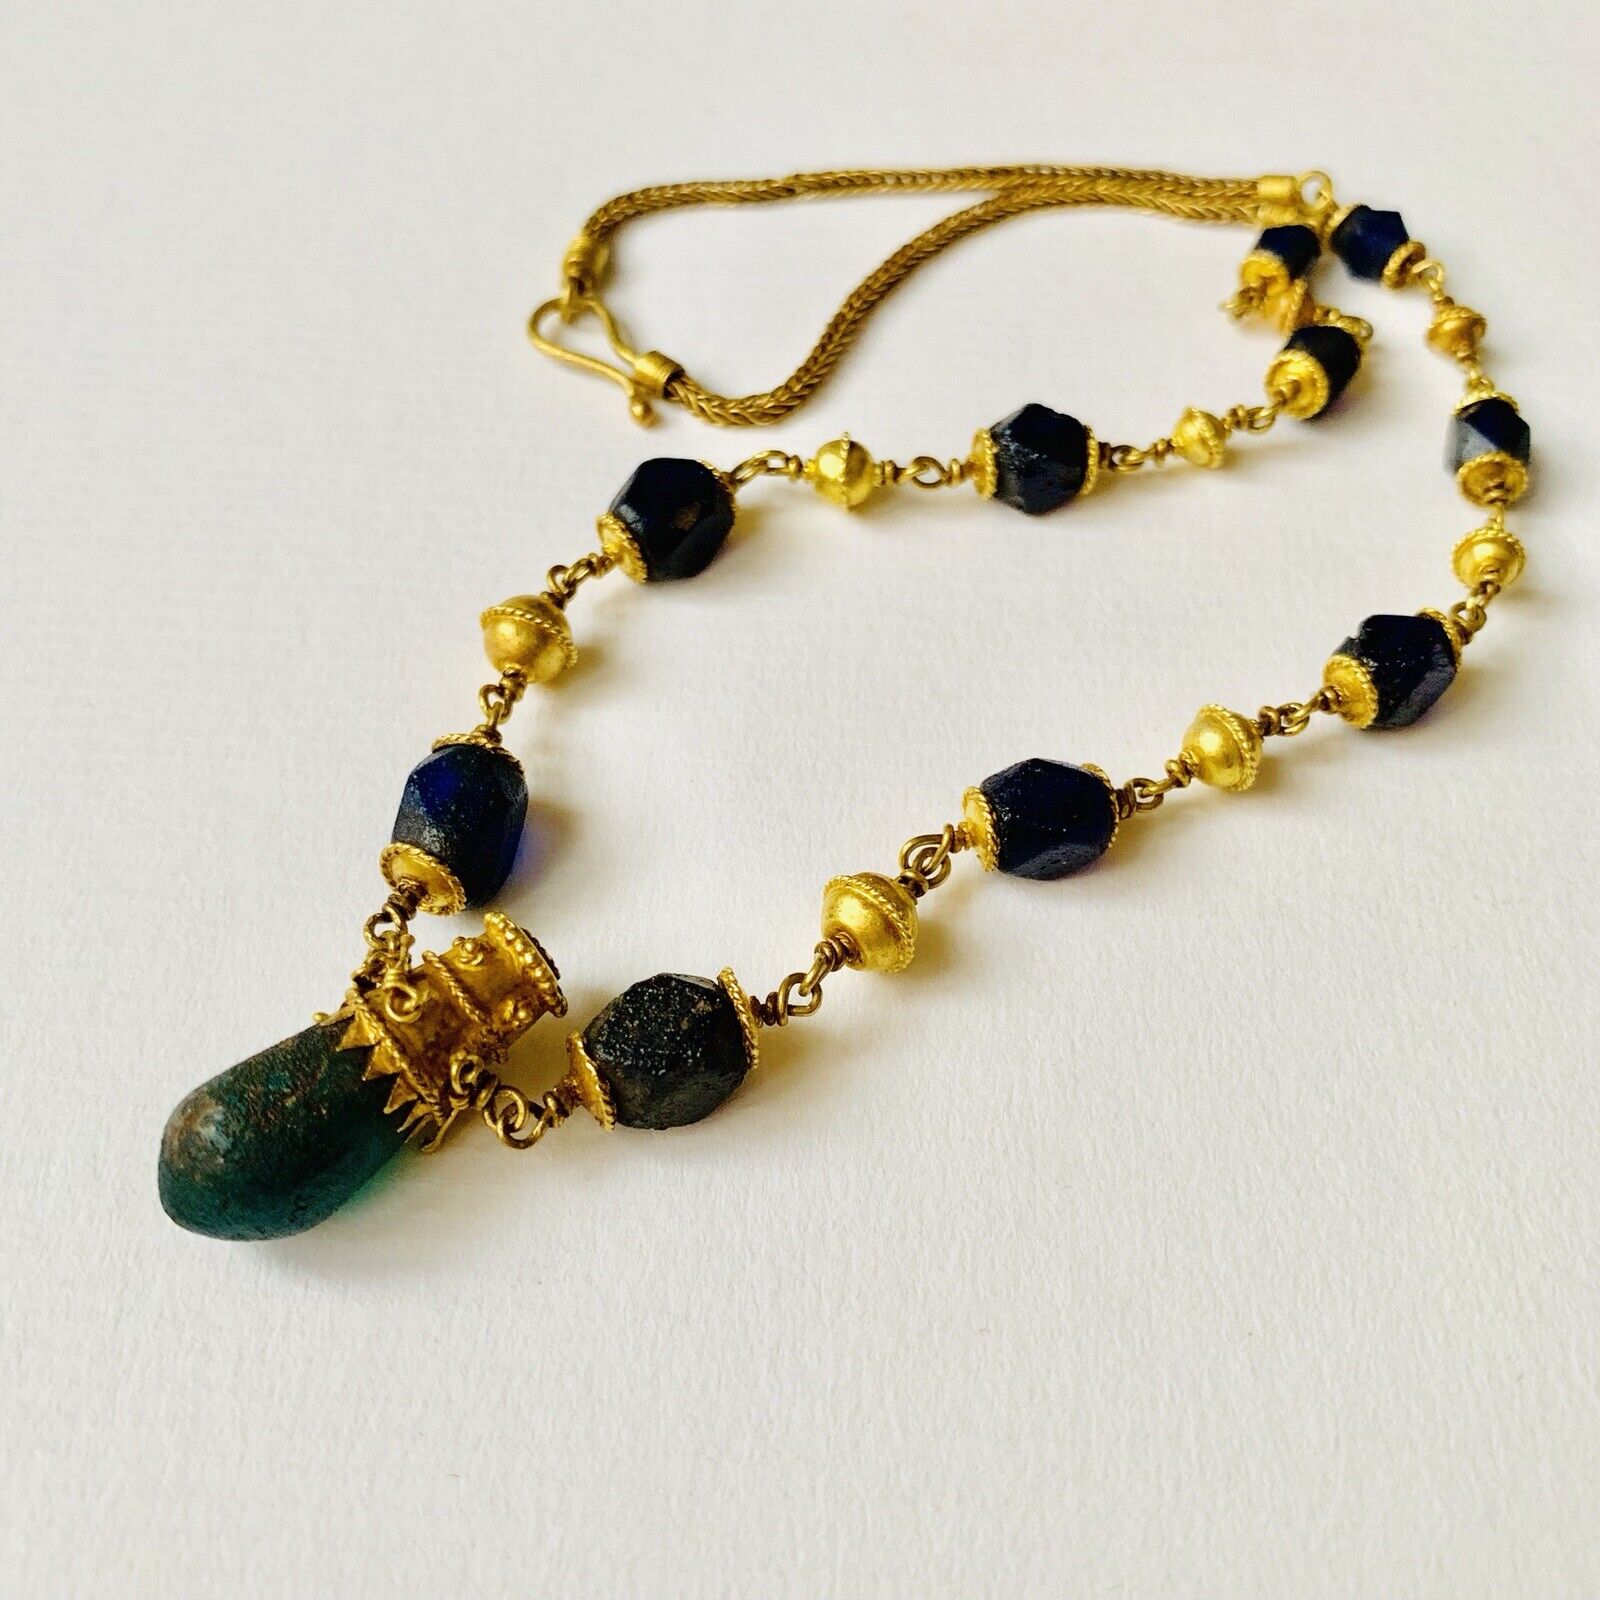 BEAUTIFUL Ancient Roman Gold Pendant Necklace With Green And Blue Glass Beads